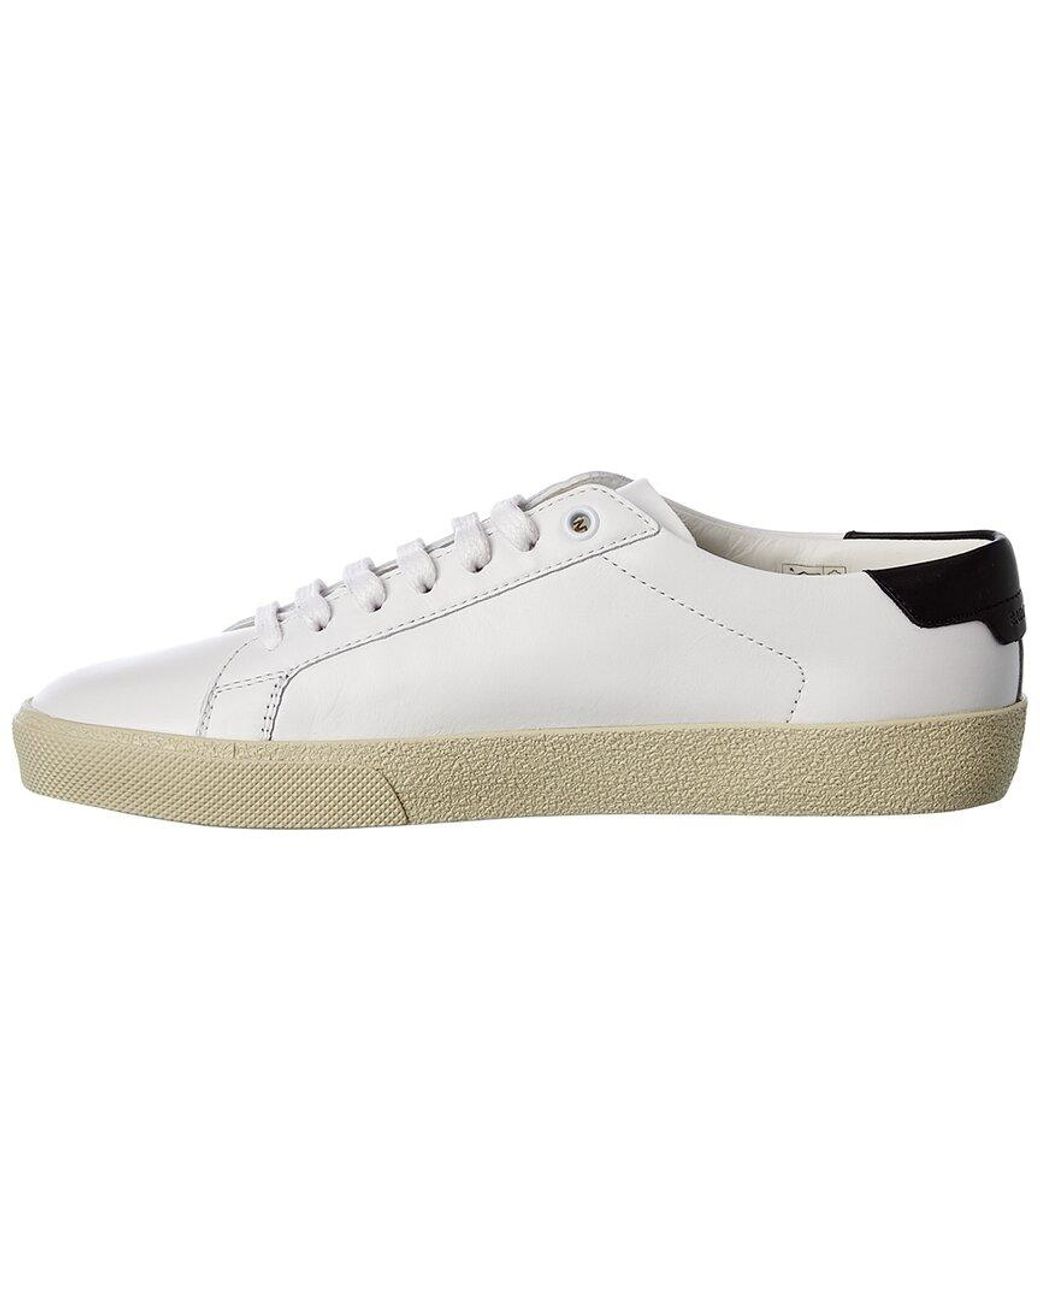 Saint Laurent Court Classic Sl/06 Leather Sneaker in White - Save 